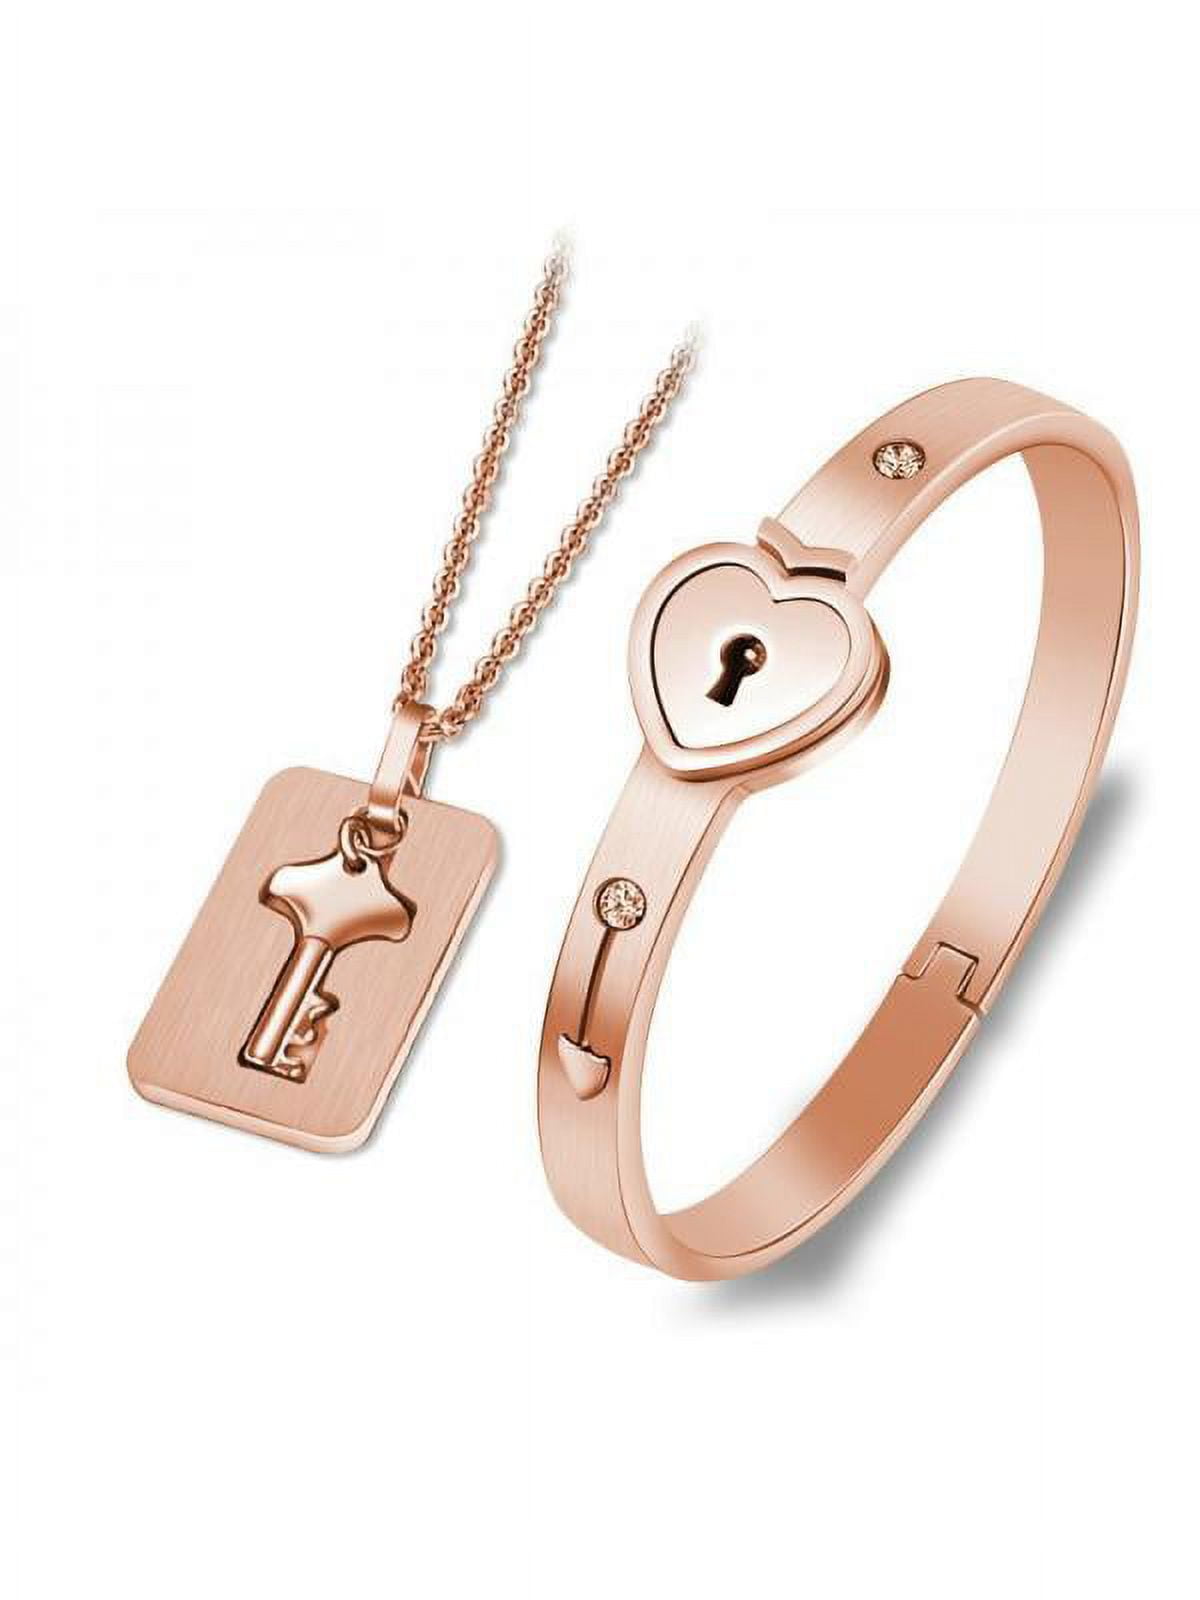 Rose Gold Plated Titanium Matching Puzzle Couple Heart Lock Bracelet And  Key Pendant Necklace For Men And Women | Fruugo NO